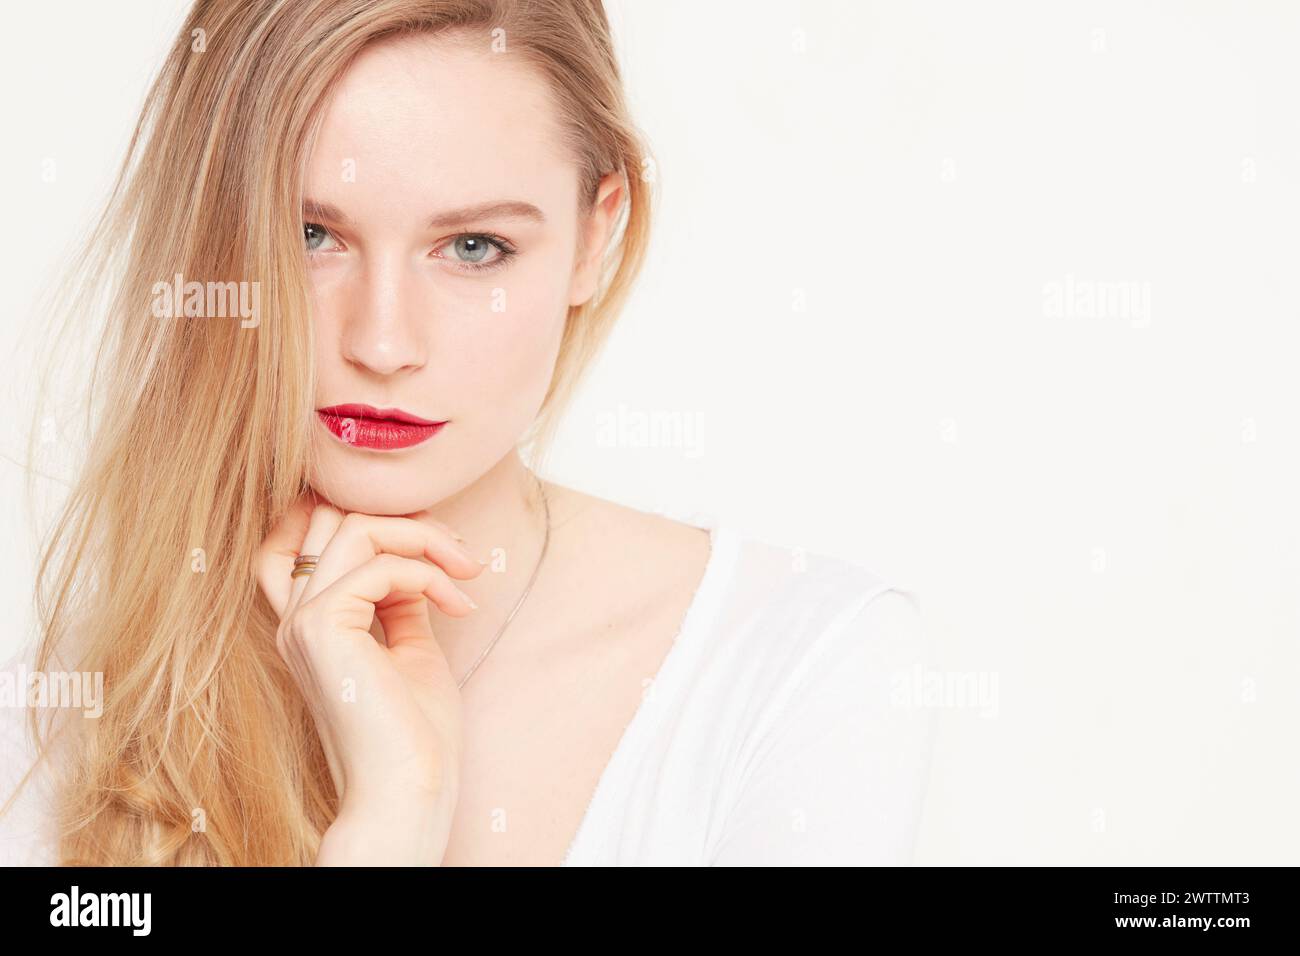 Portrait of a woman with red lipstick Stock Photo